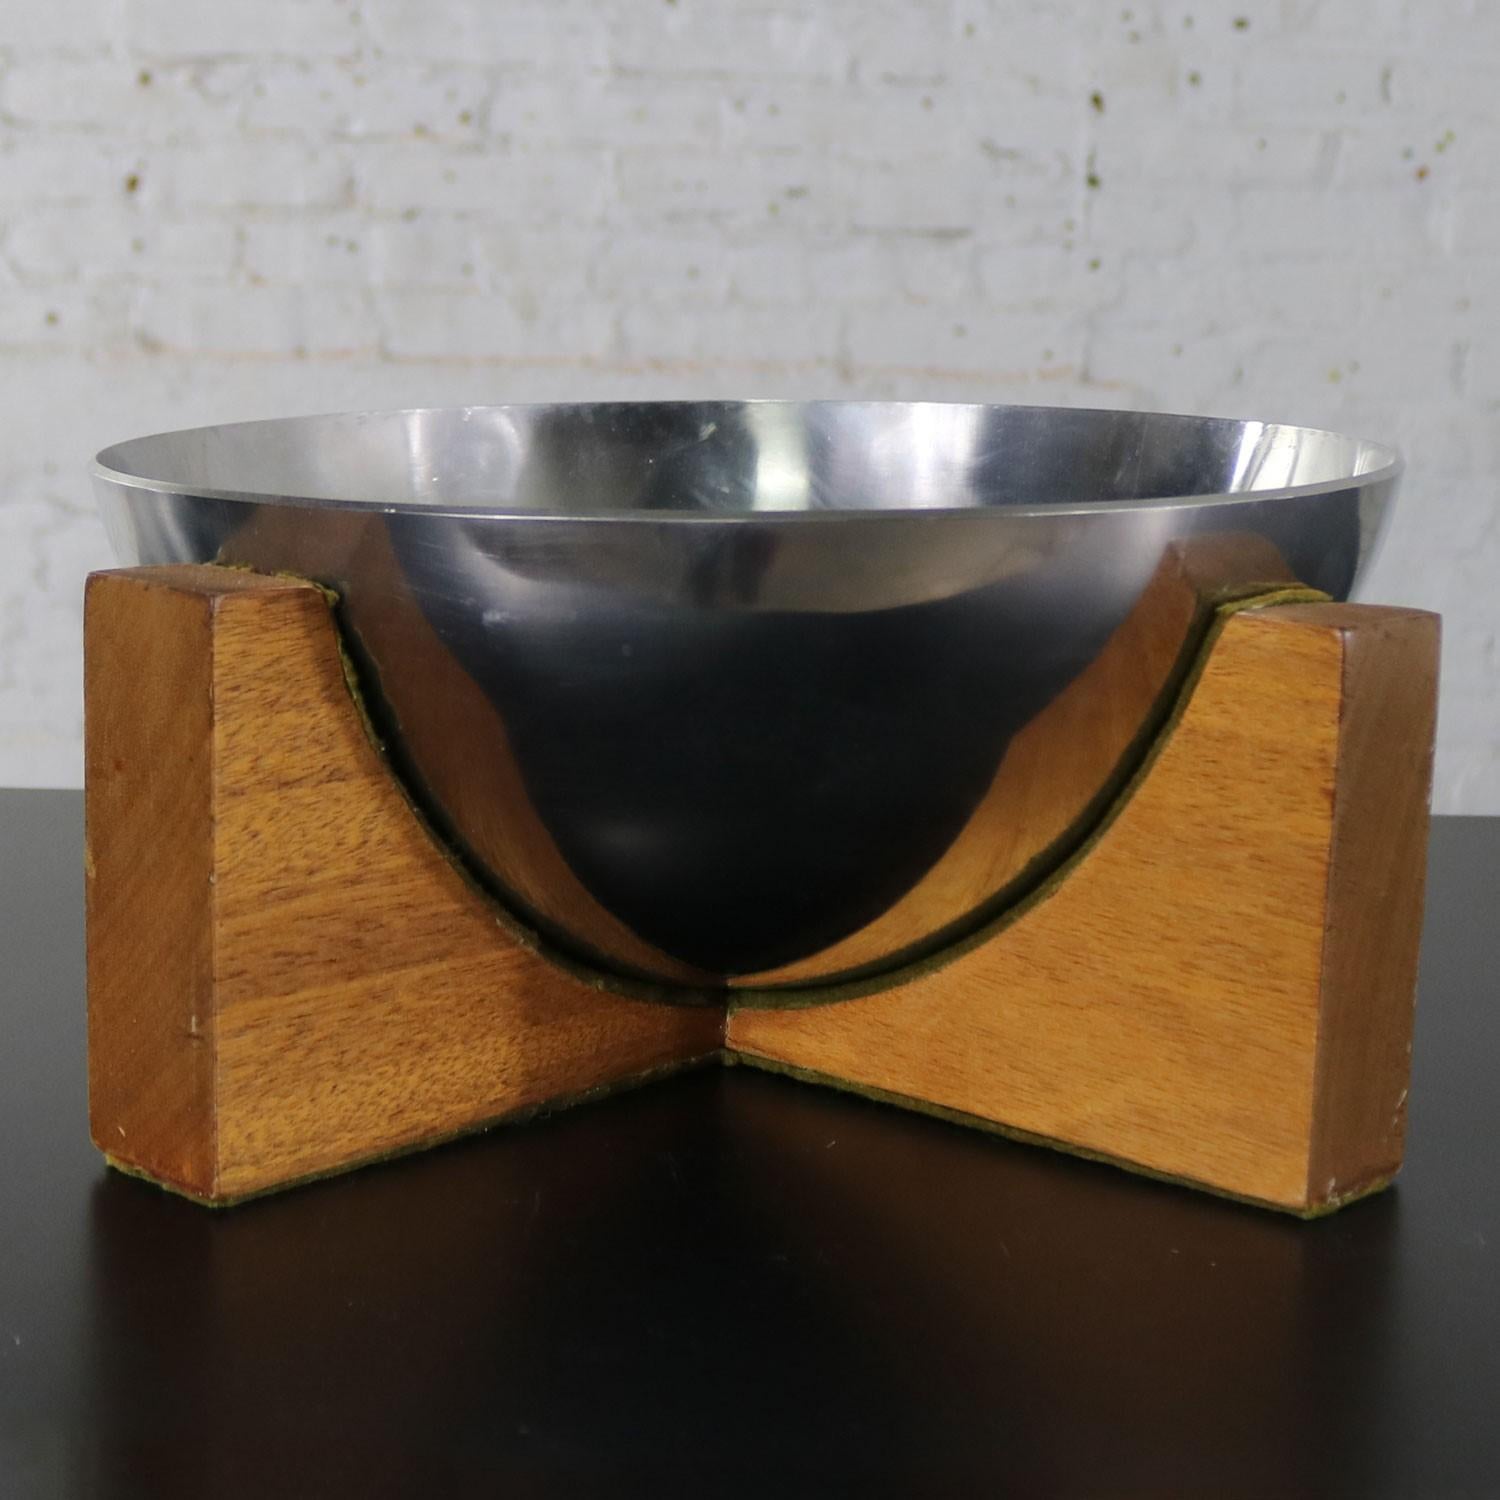 Handsome centerpiece Mid-Century Modern stainless-steel half sphere bowl on a mahogany wood plus sign or cross stand. This piece seems to be artist made but is unsigned. It is in wonderful vintage condition but not without signs of its age. Please